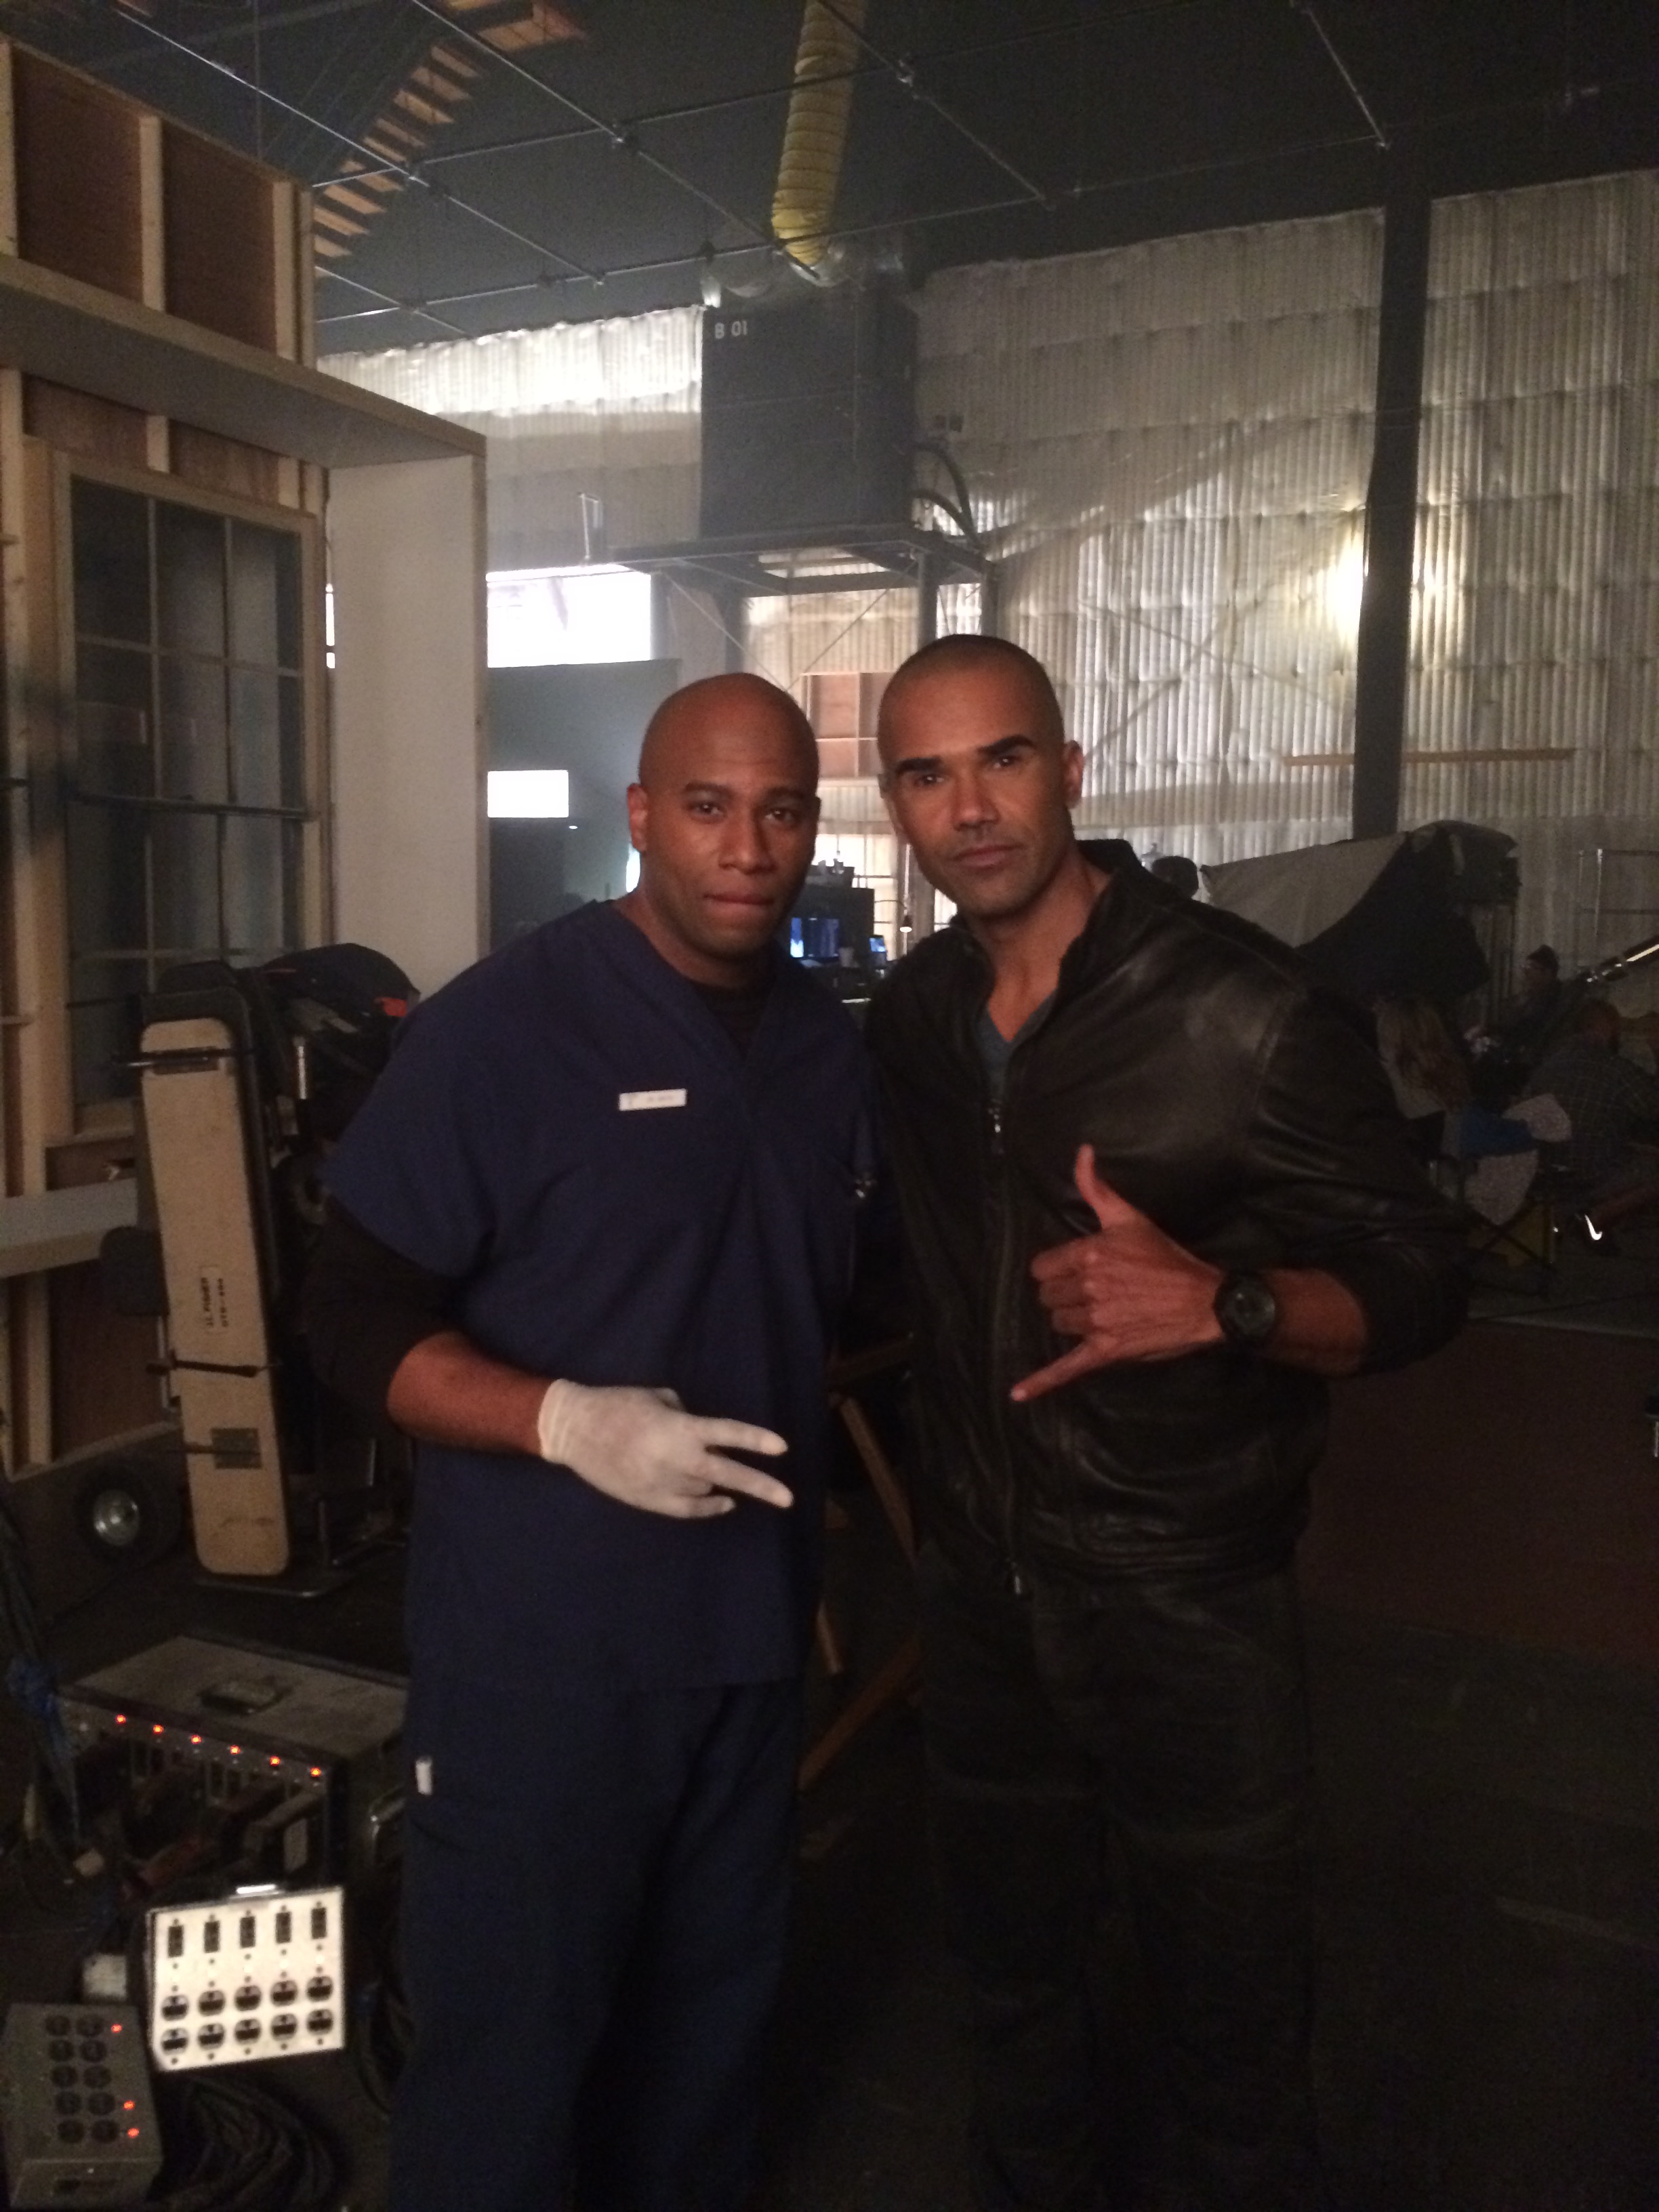 Maurice Hall and Shemar Moore on set of CBS's Criminal Minds.